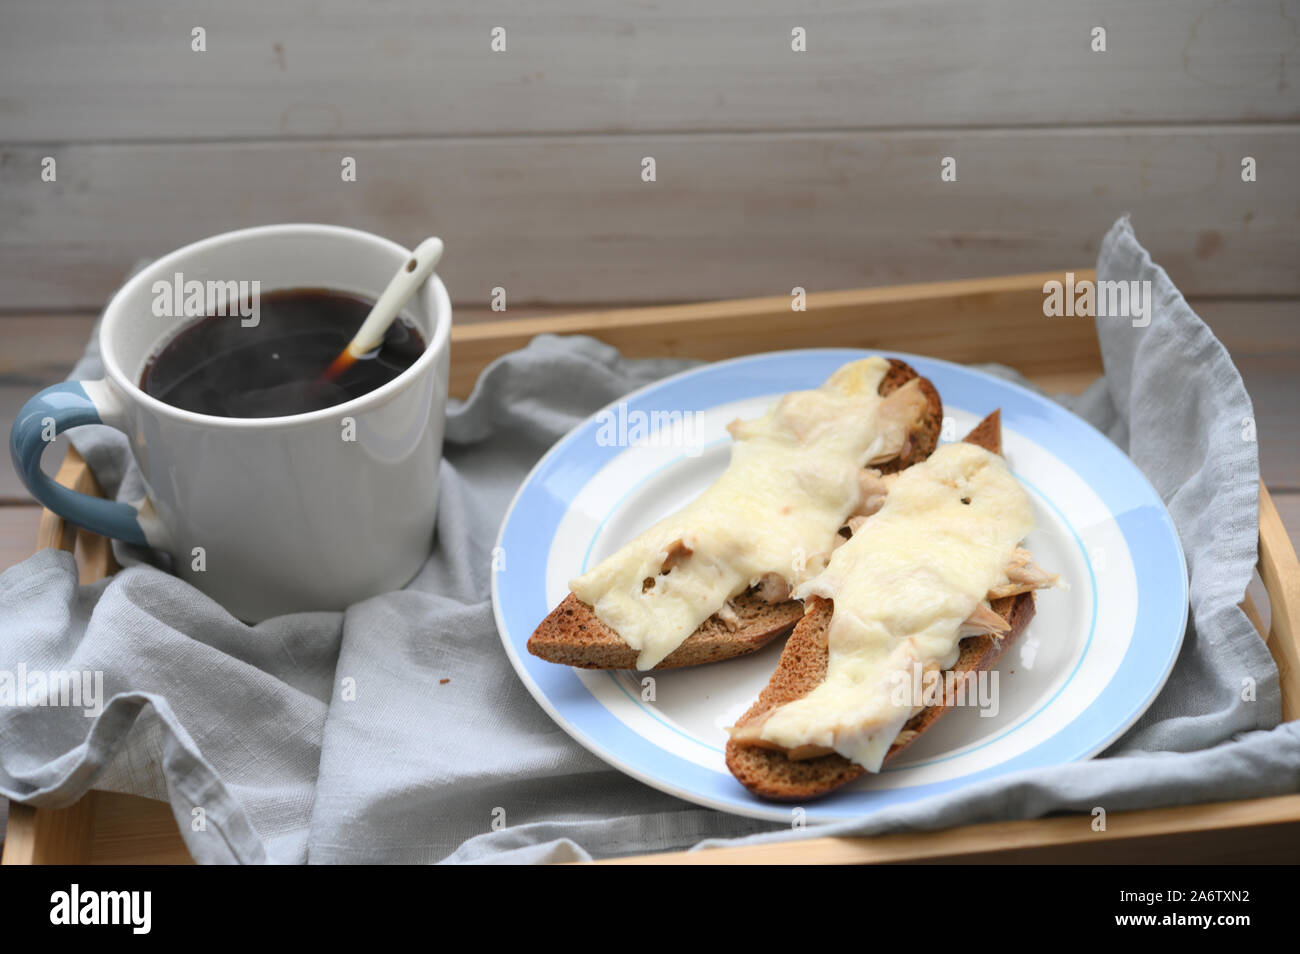 Rustic breakfast: two hot baguette sandwiches with chicken meat and cheese and a cup of black coffee on a wooden tray Stock Photo